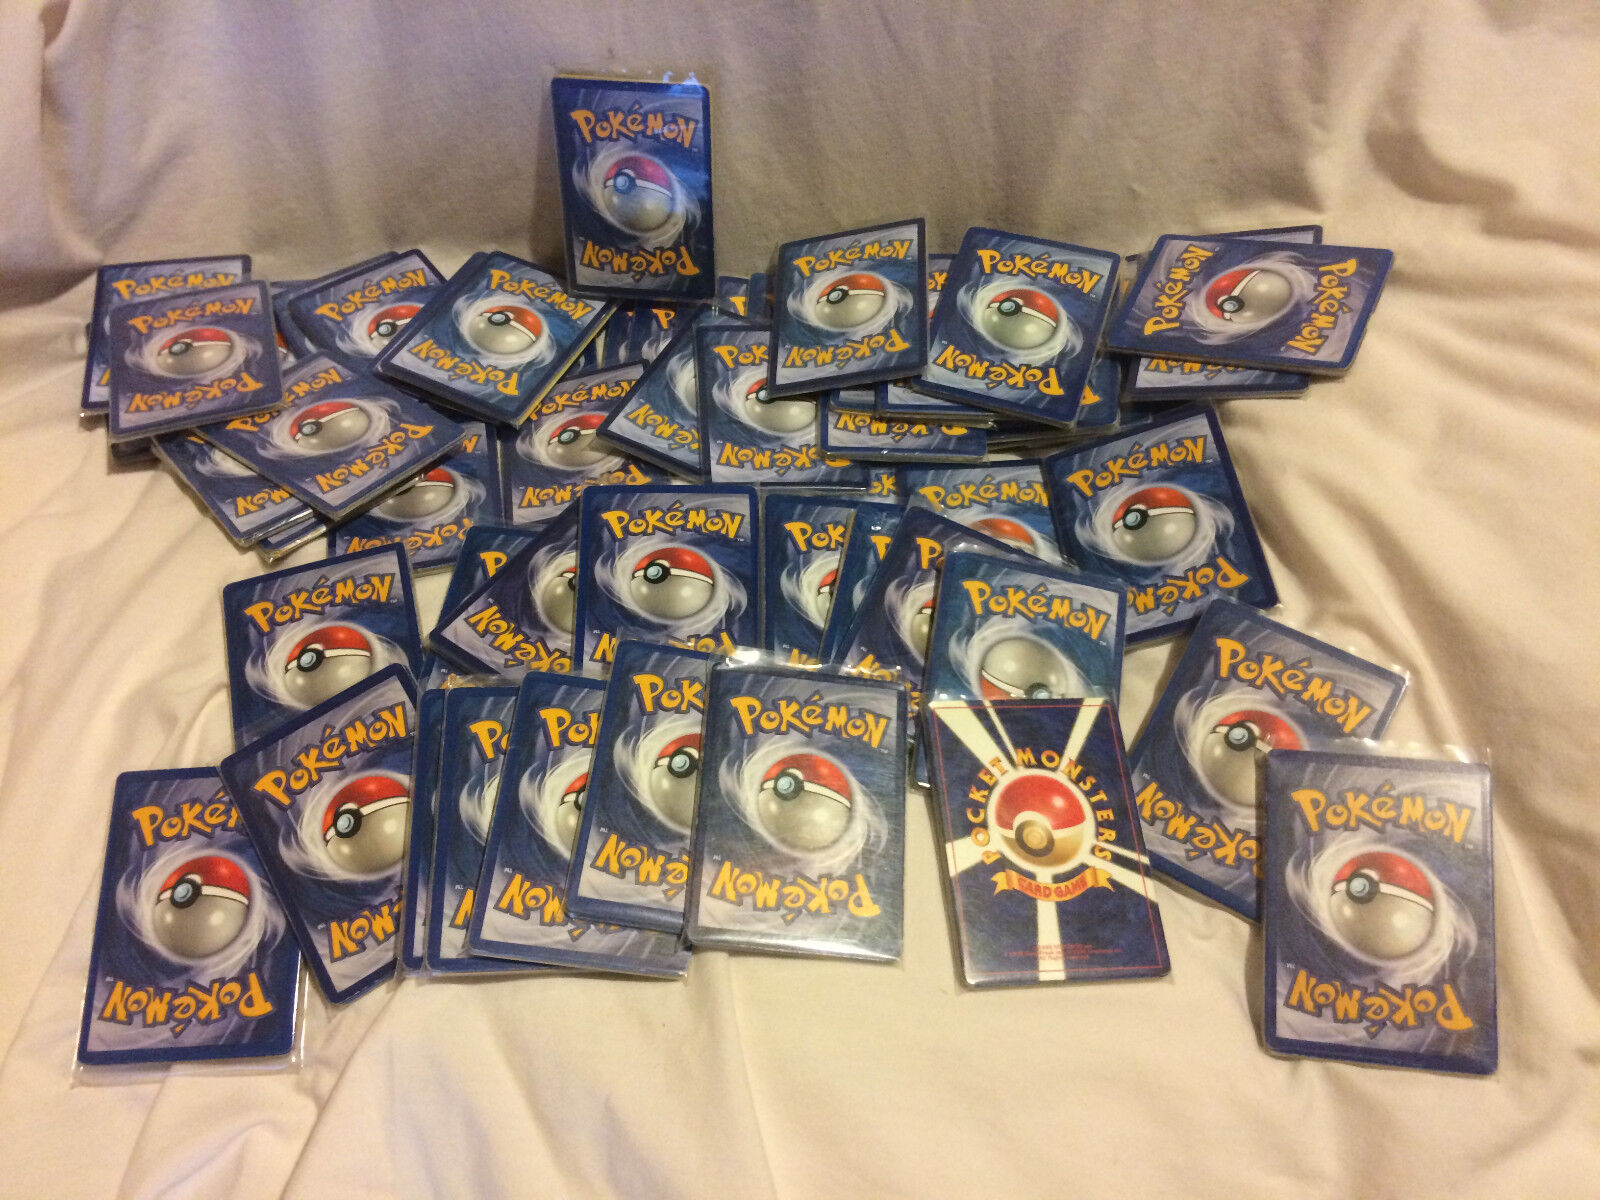 12 Pokemon Card Booster Pack Reverse or Holo Foil in every Repack